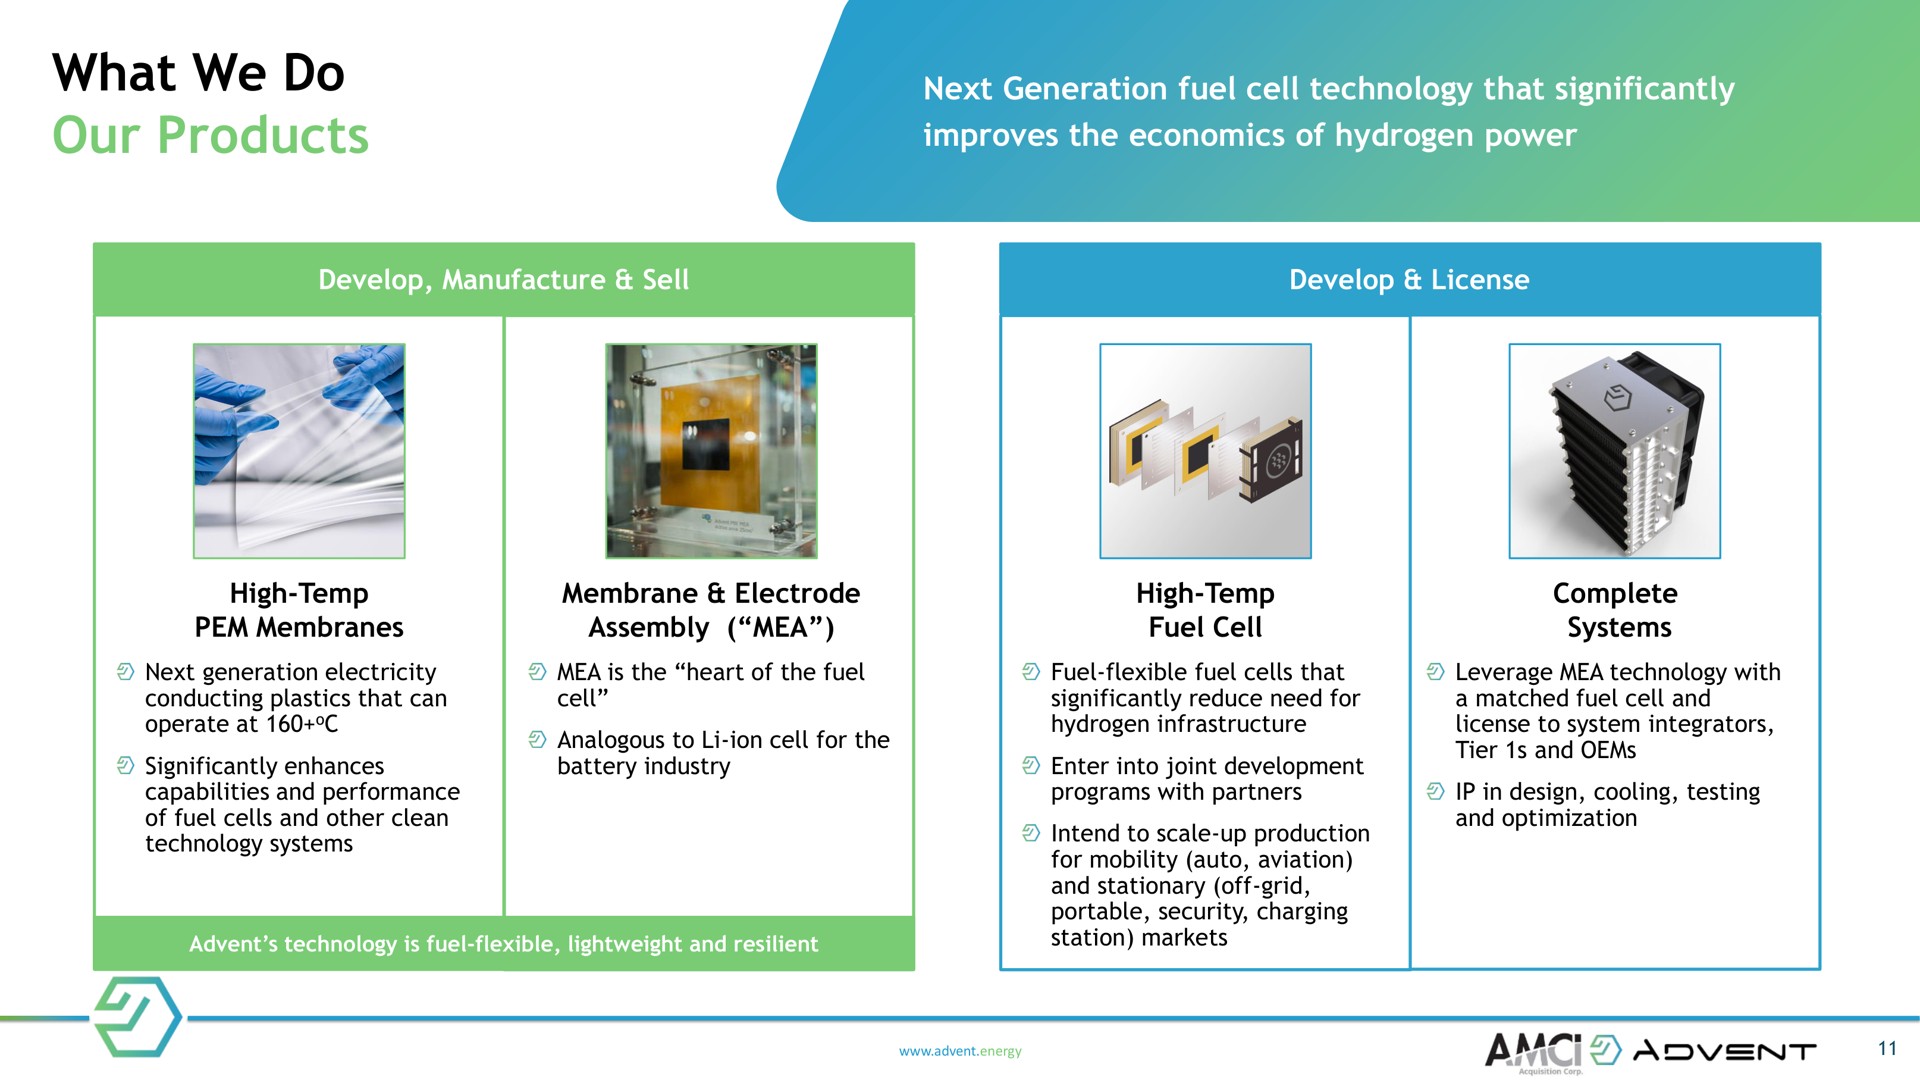 what we do our products next generation fuel cell technology that significantly improves the economics of hydrogen power develop manufacture sell develop license high temp membranes membrane electrode assembly high temp fuel cell complete systems is the heart of the fuel fuel flexible fuel cells that leverage technology with next generation electricity conducting plastics that can operate at cell analogous to ion cell for the significantly enhances battery industry capabilities and performance of fuel cells and other clean technology systems technology is fuel flexible lightweight and resilient significantly reduce need for hydrogen infrastructure enter into joint development programs with partners intend to scale up production for mobility auto aviation and stationary off grid portable security charging station markets a matched fuel cell and license to system integrators tier and in design cooling testing and optimization energy amt a | Advent